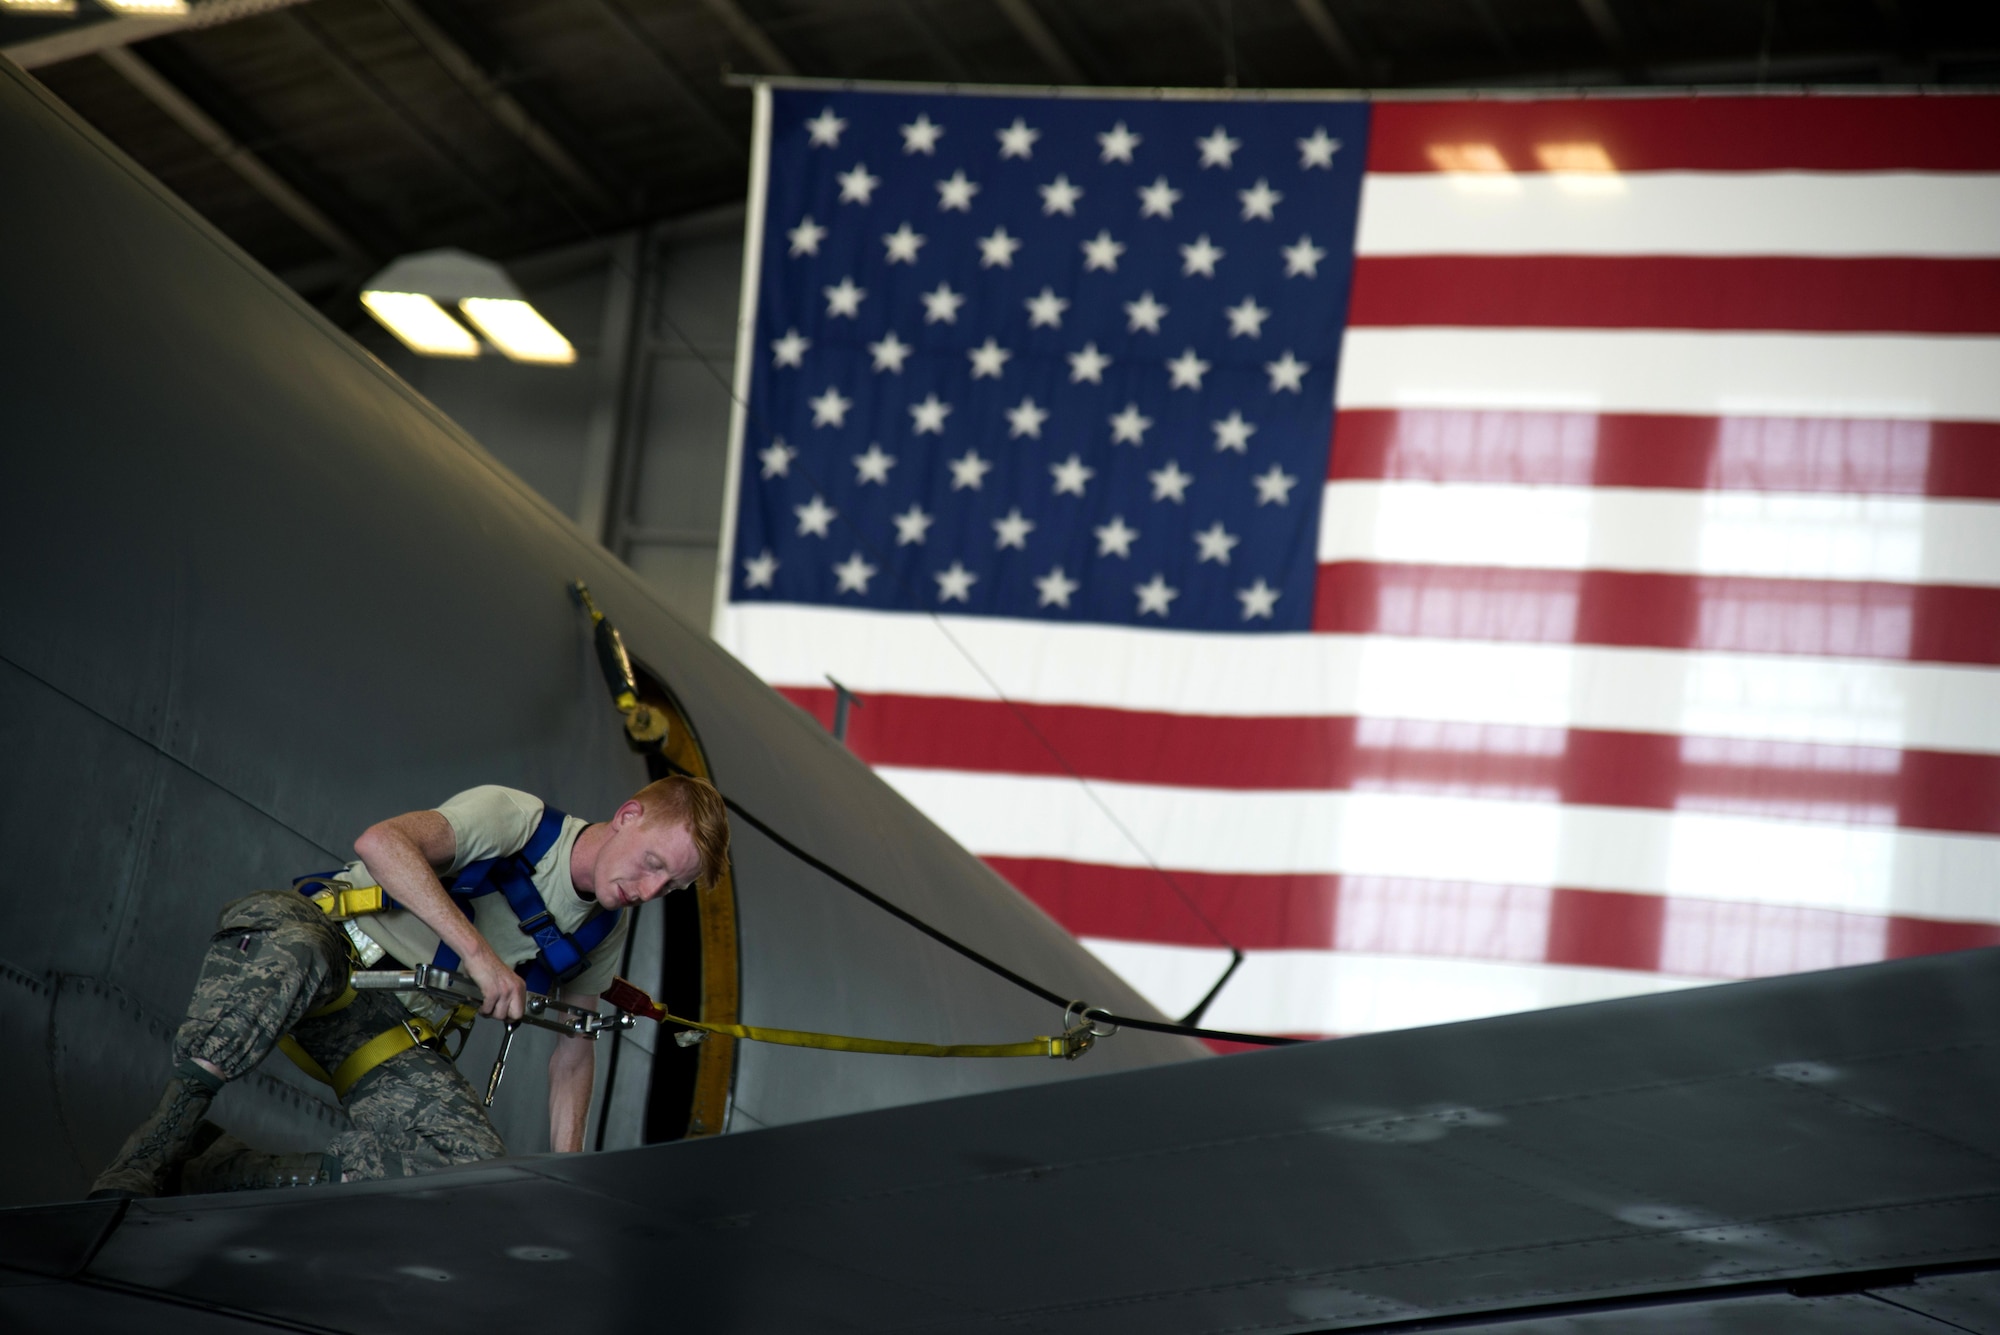 U.S. Air Force Staff Sgt. Robert Riddle, a refuel aircraft maintenance journeyman assigned to the 6th Aircraft Maintenance Squadron, inspects the wing of a KC-135 Stratotanker aircraft April 10, 2017, at MacDill Air Force Base, Fla. The two-week-long inspection required multiple squadrons to come together to get the job done. (U.S. Air Force photo by Airman 1st Class Rito Smith)  